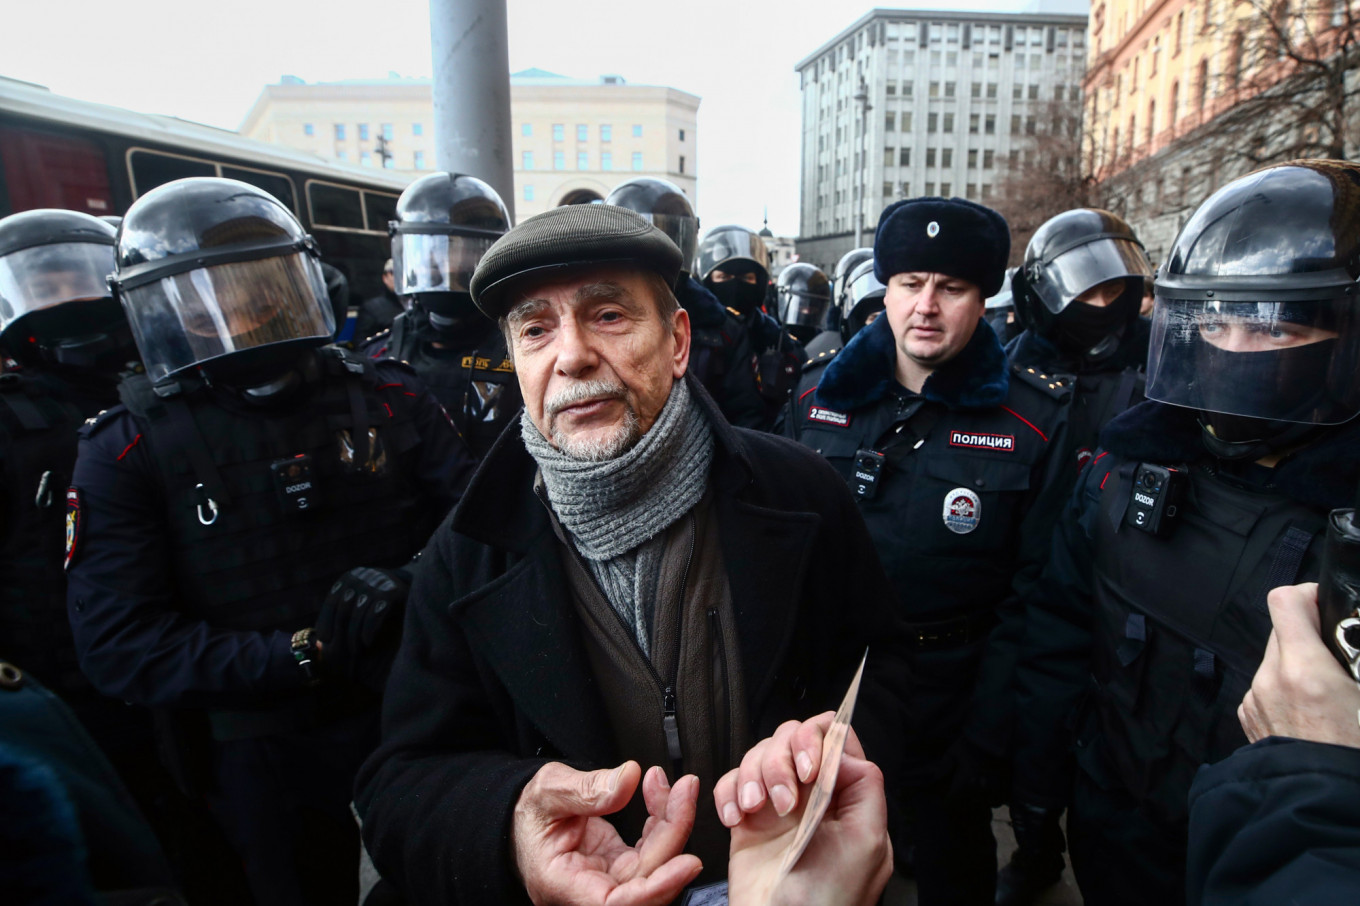 Dozens Detained at Russian Opposition Protest